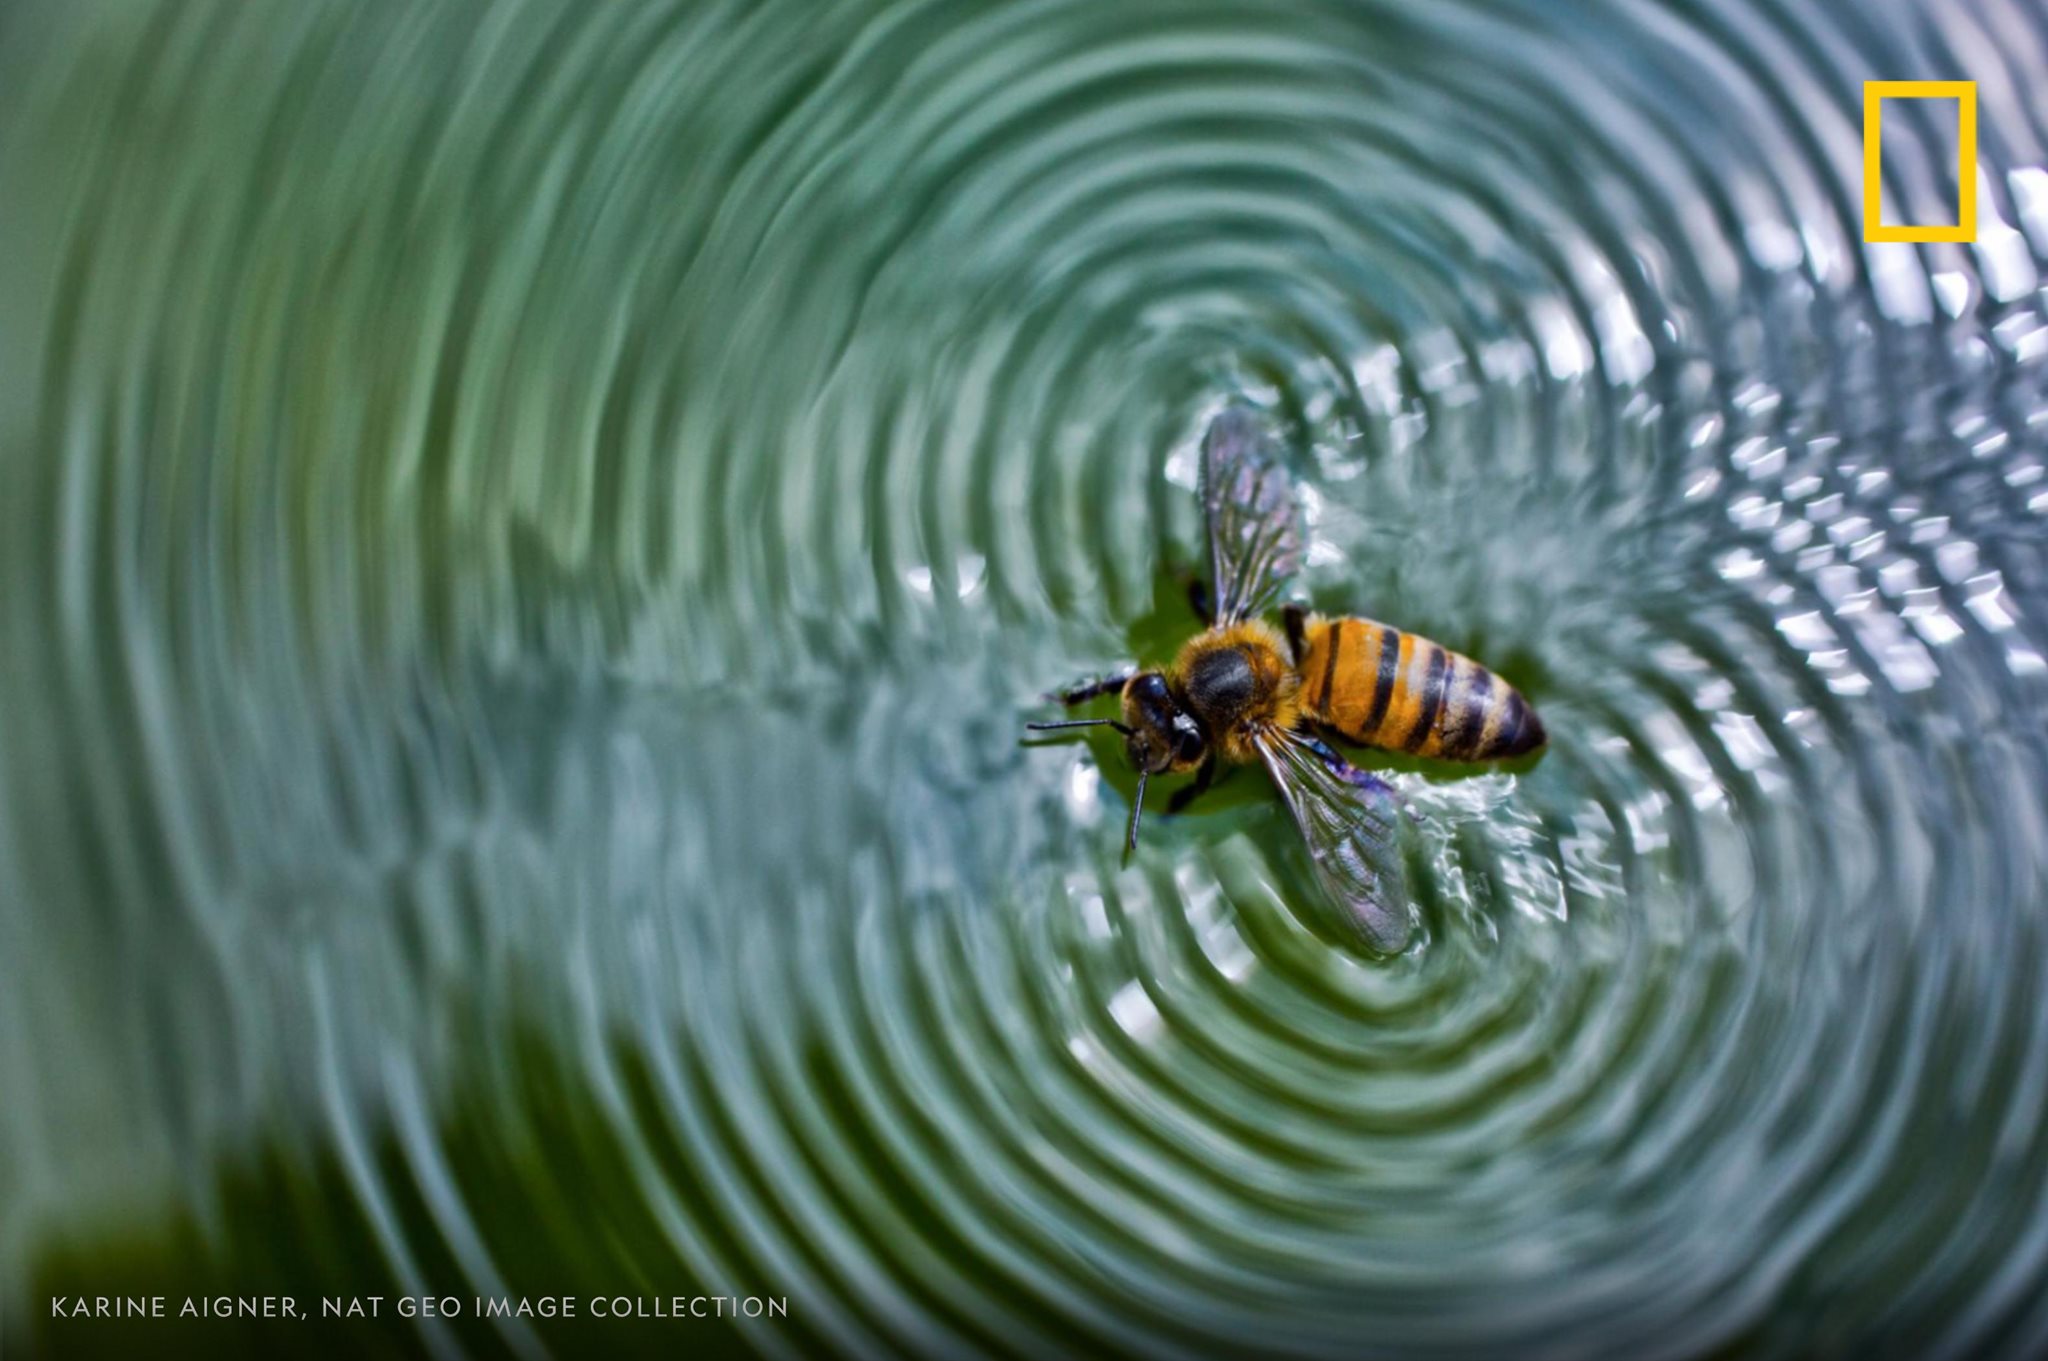 Just like every other living thing, honeybees need water to survive. During the summer, a hive needs at least a liter of water per day. #NationalHoneyBeeDay https://on.natgeo.com/31D80LE